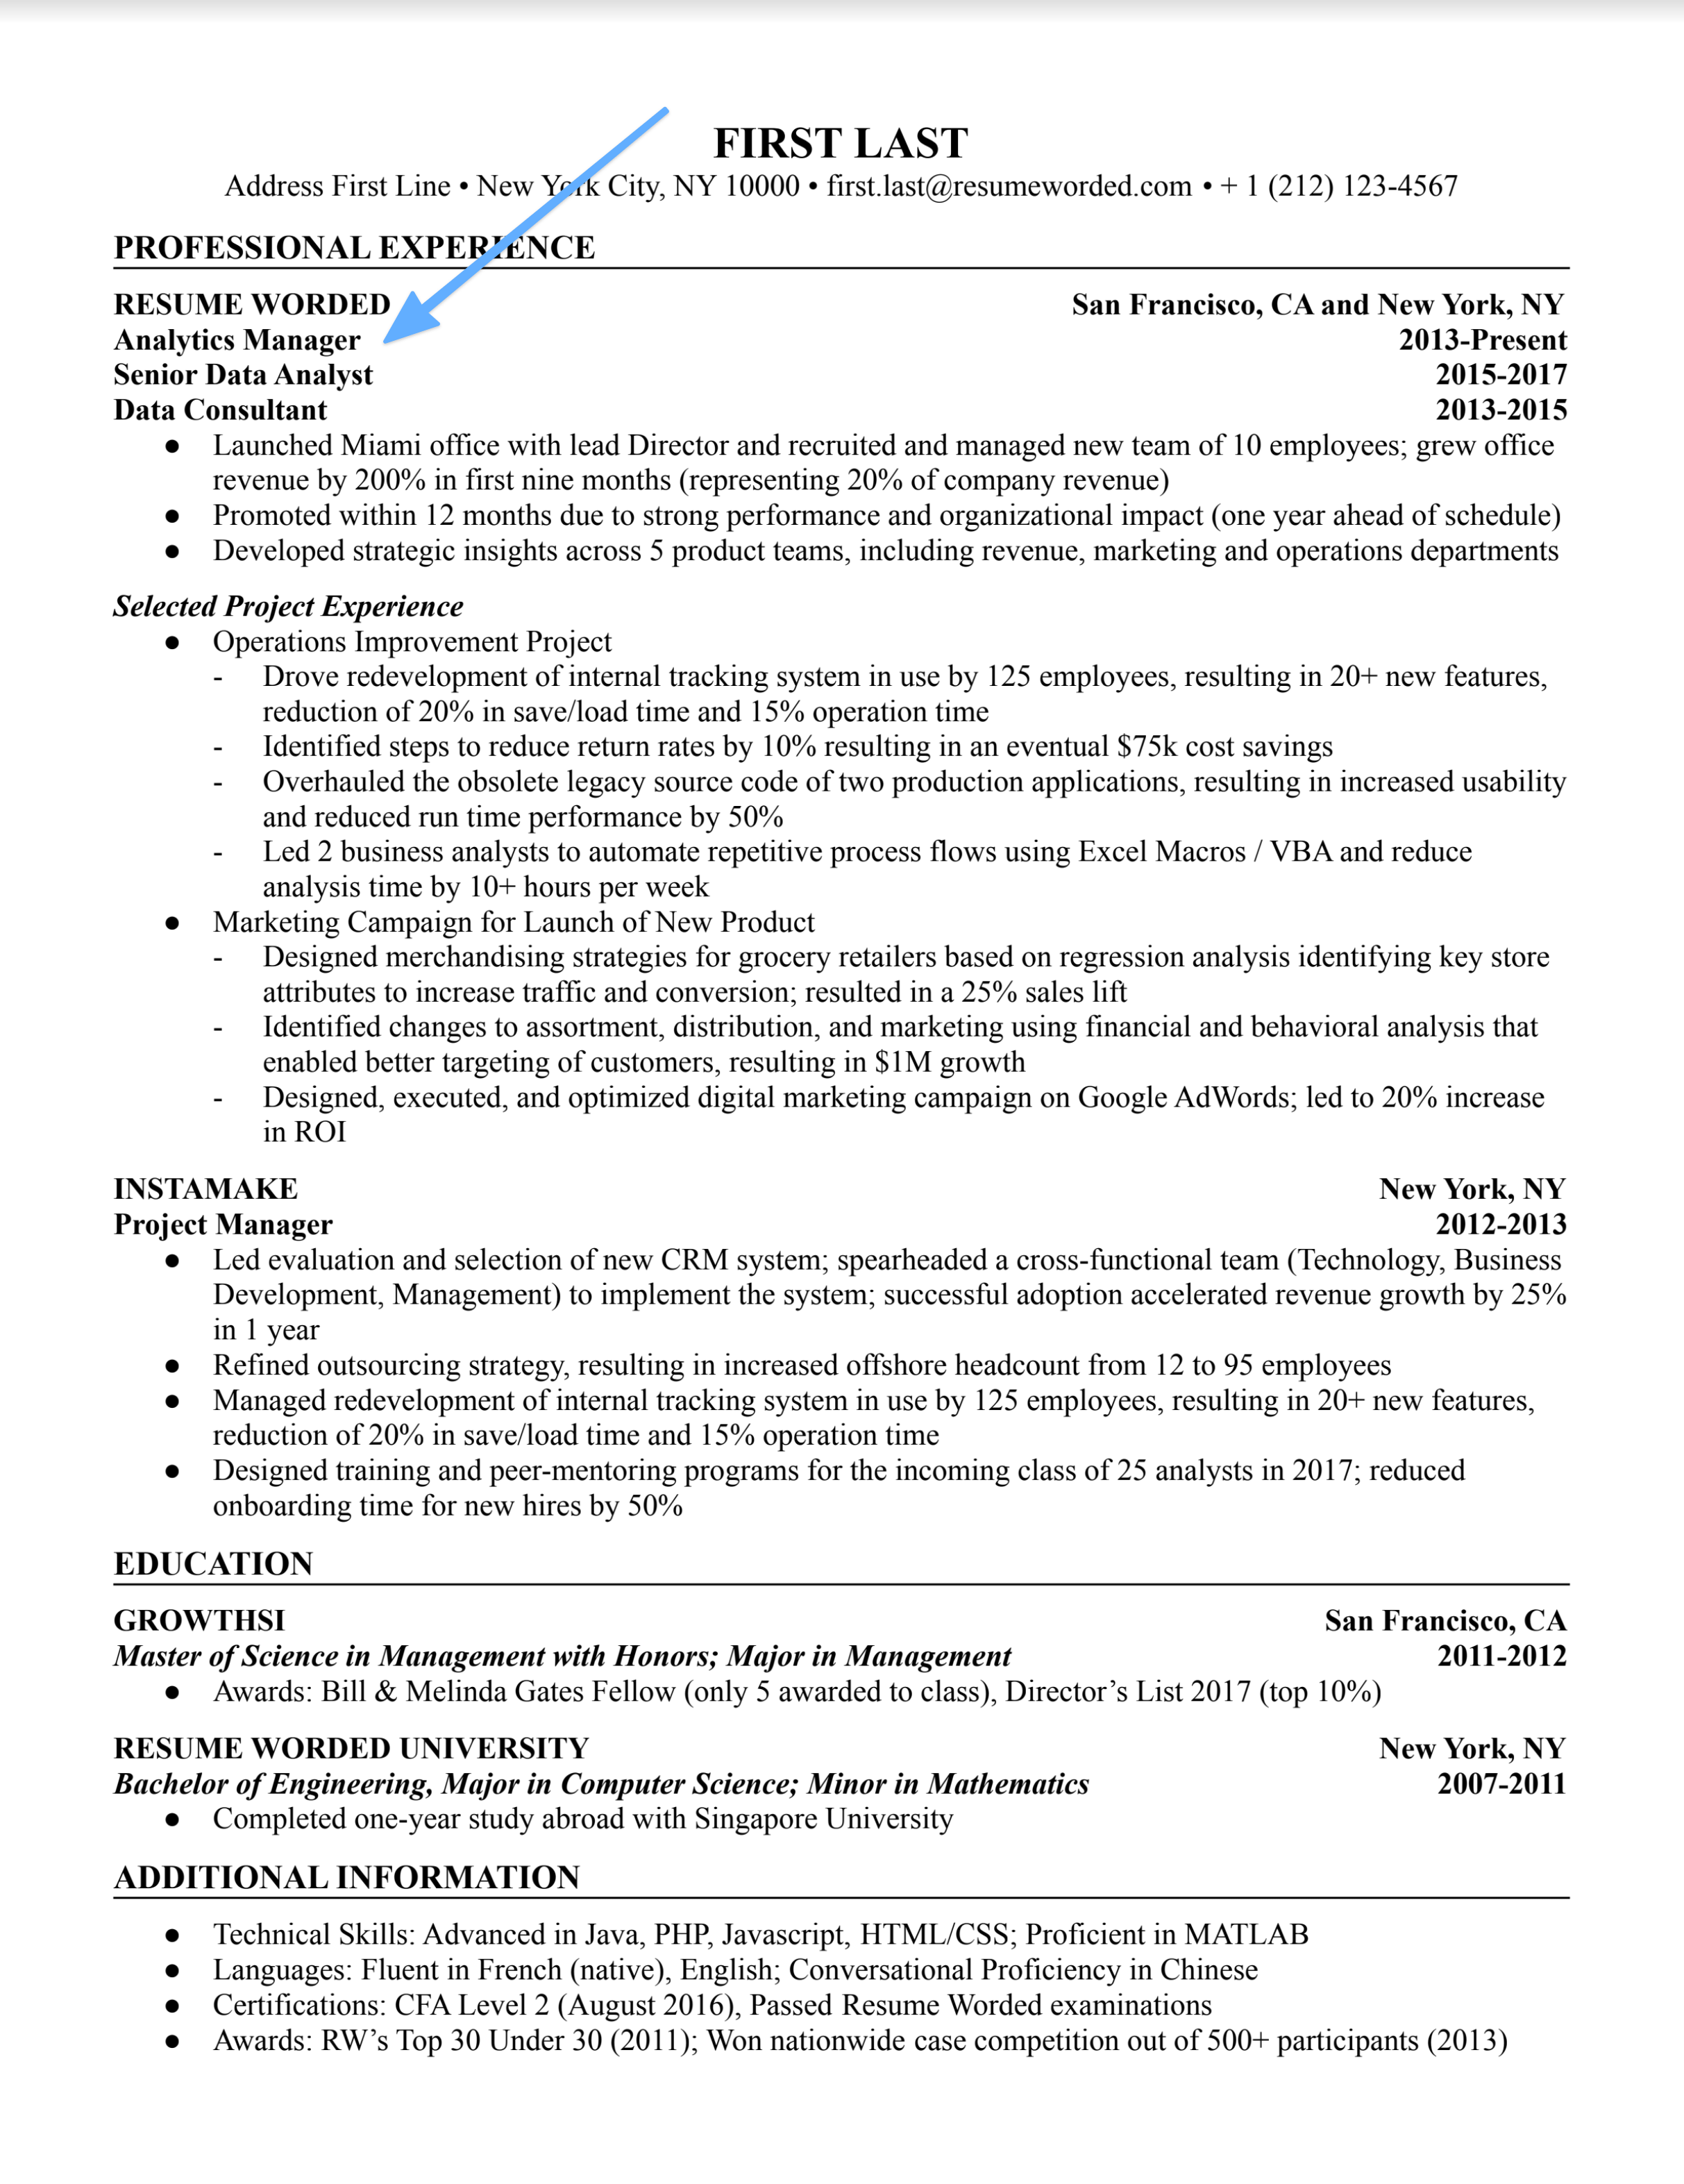 An analytics manager resume template using strong metrics